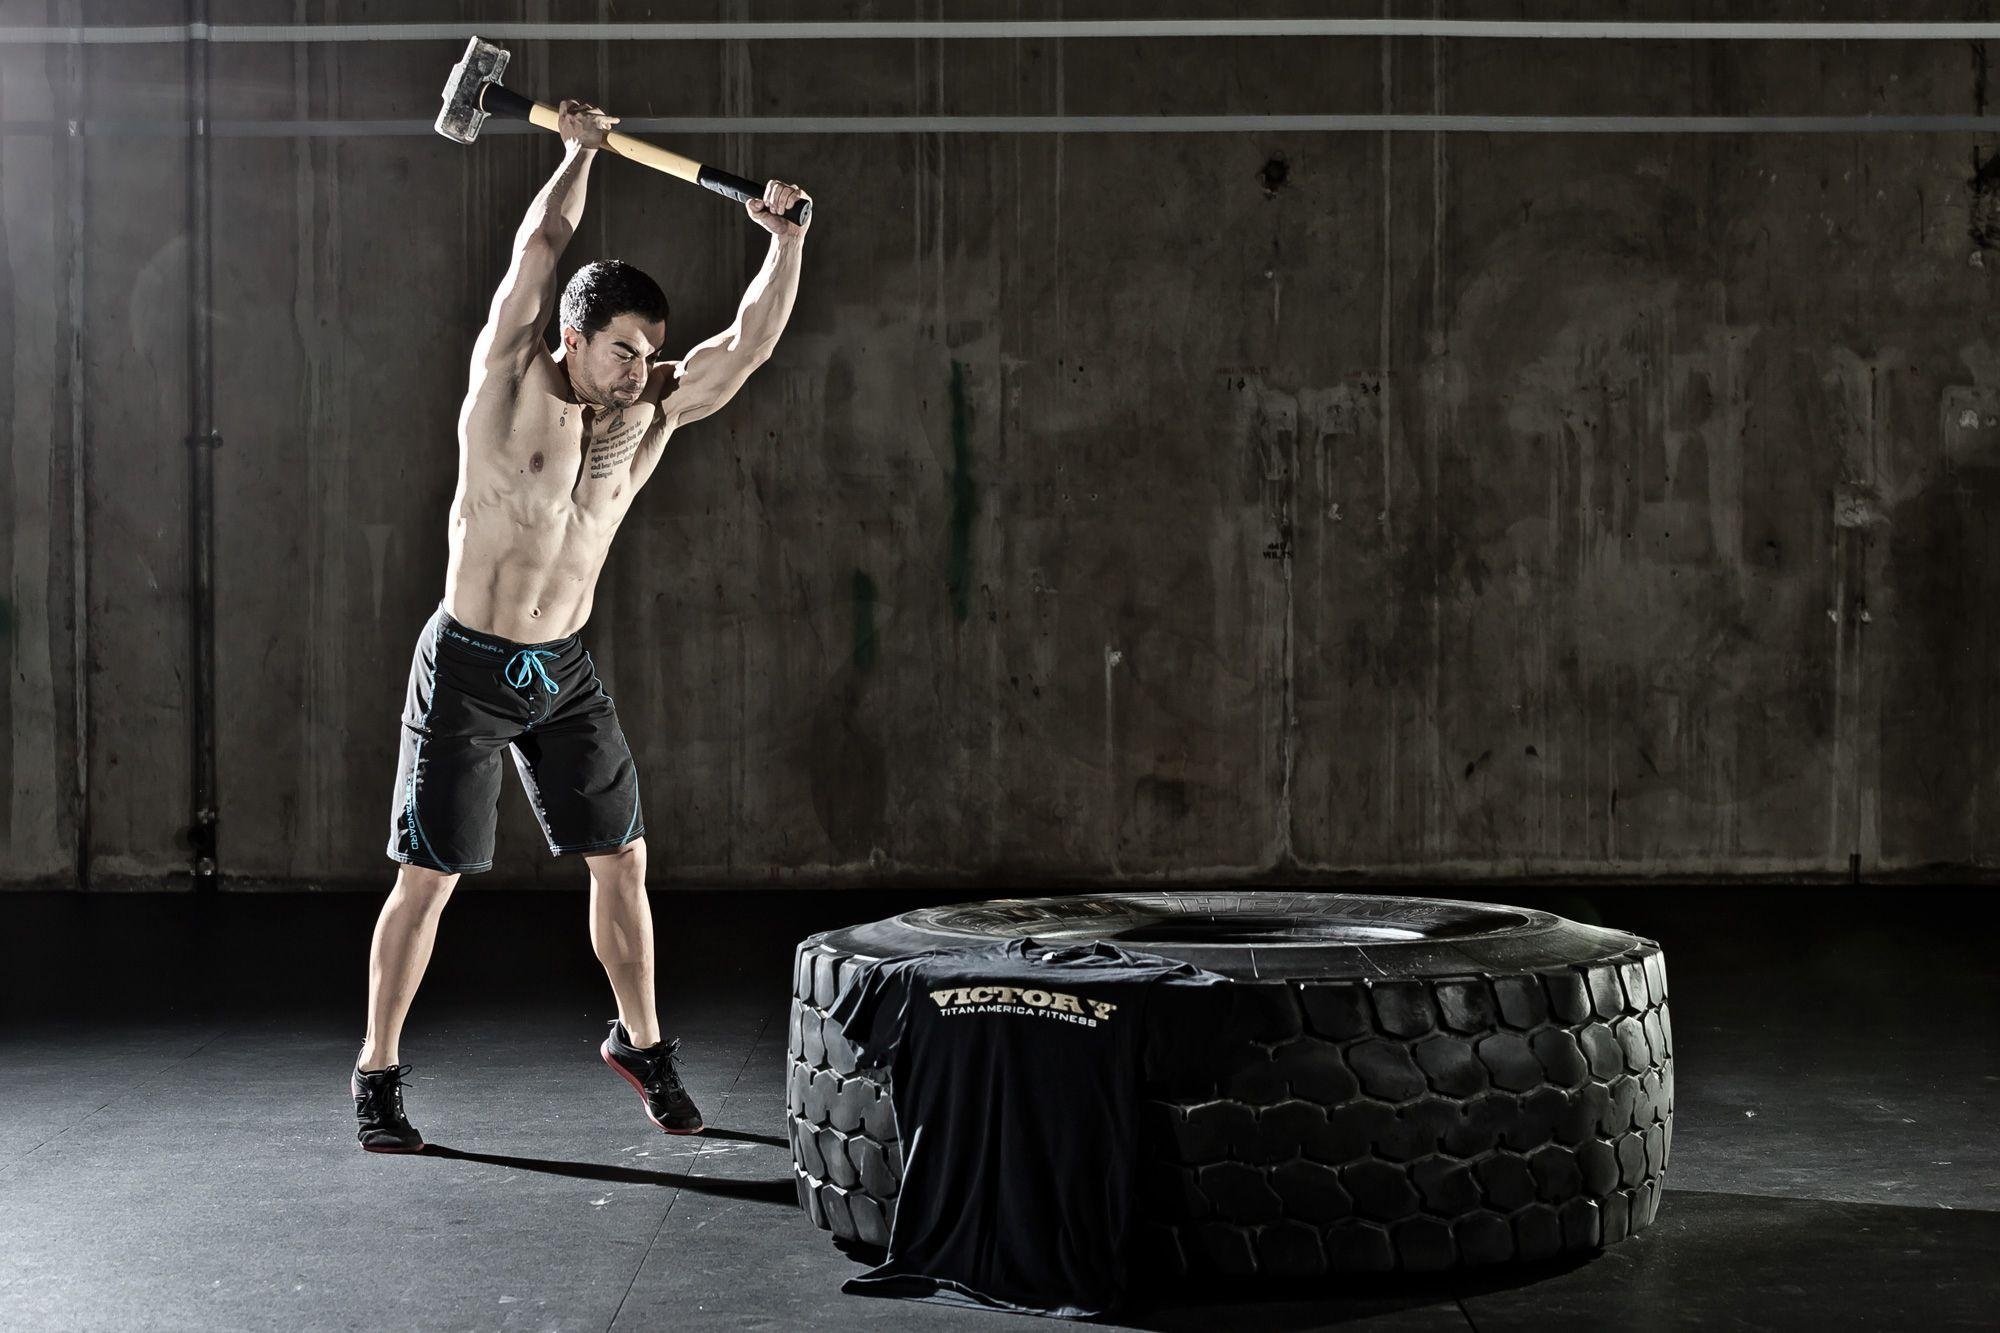 CrossFit: The sizes and types of tires, Hitting the big tire, Sledgehammer, Sports gear. 2000x1340 HD Wallpaper.